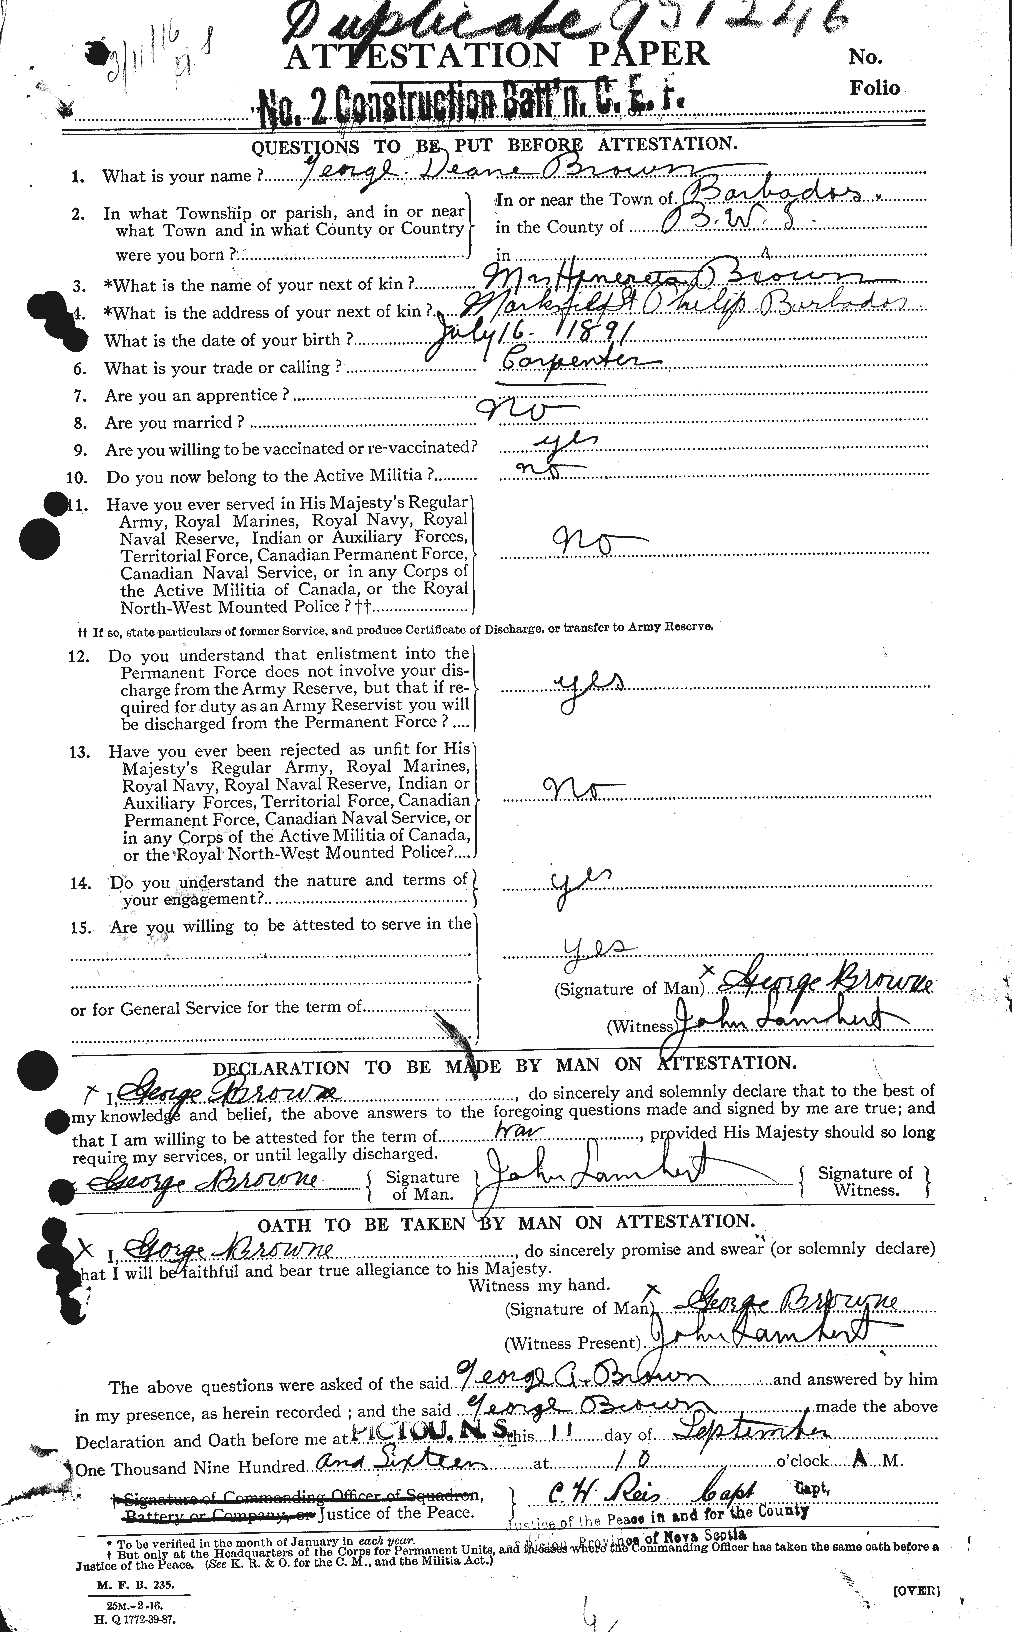 Personnel Records of the First World War - CEF 267900a